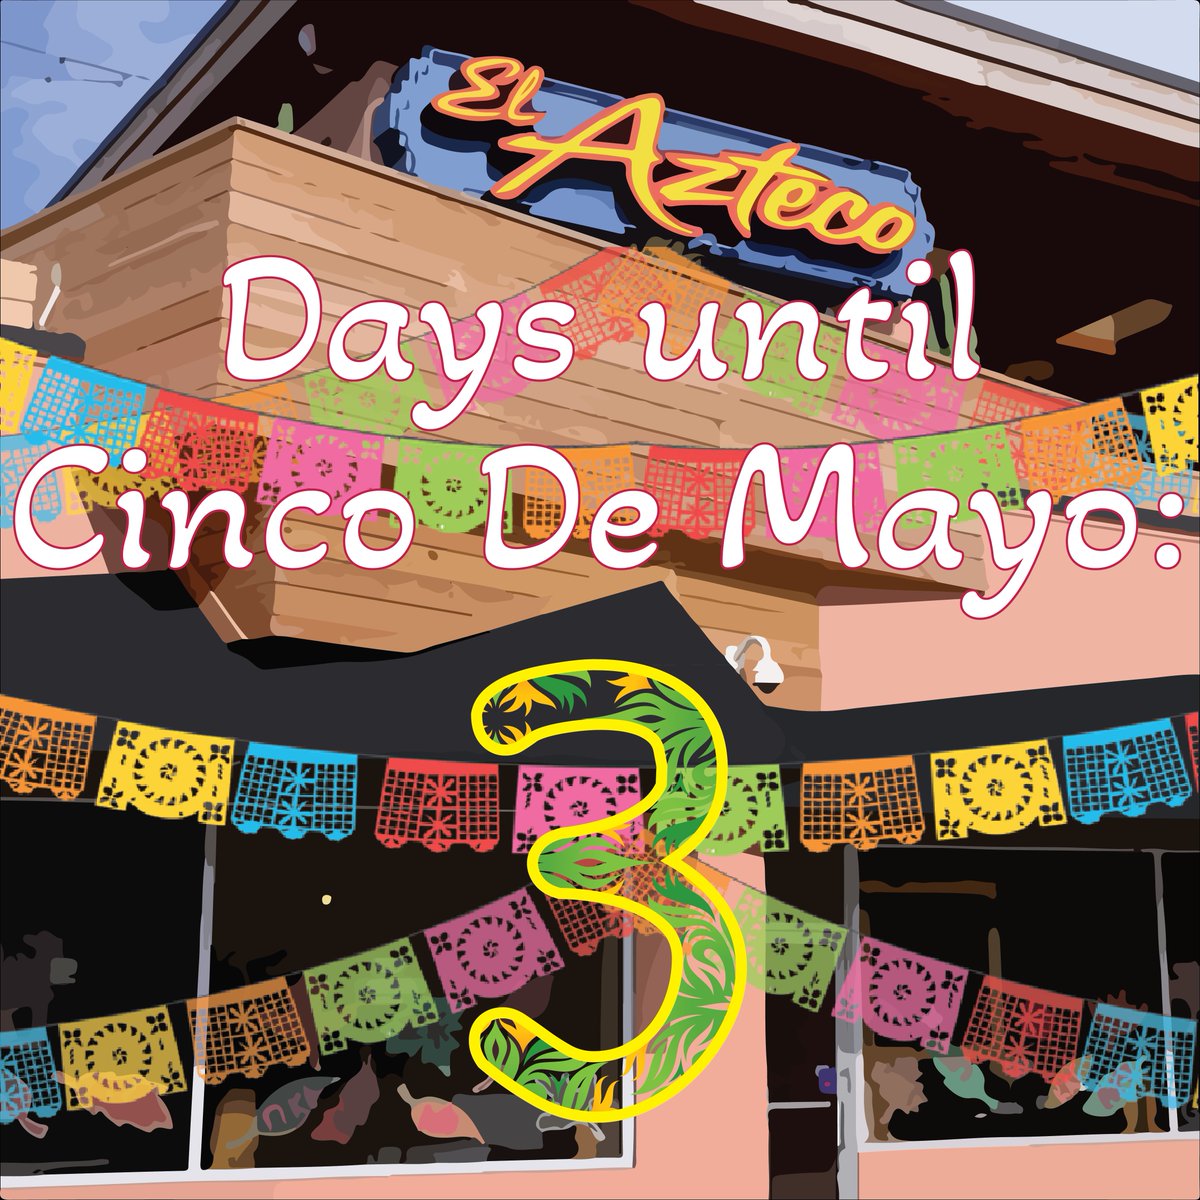 Another day closer to Cinco De Mayo! Only 3 days left! We're ready to go at El Az!

#elazteco #cincodemayo #countdown #3days #mexicanrestaurant #eastlansing